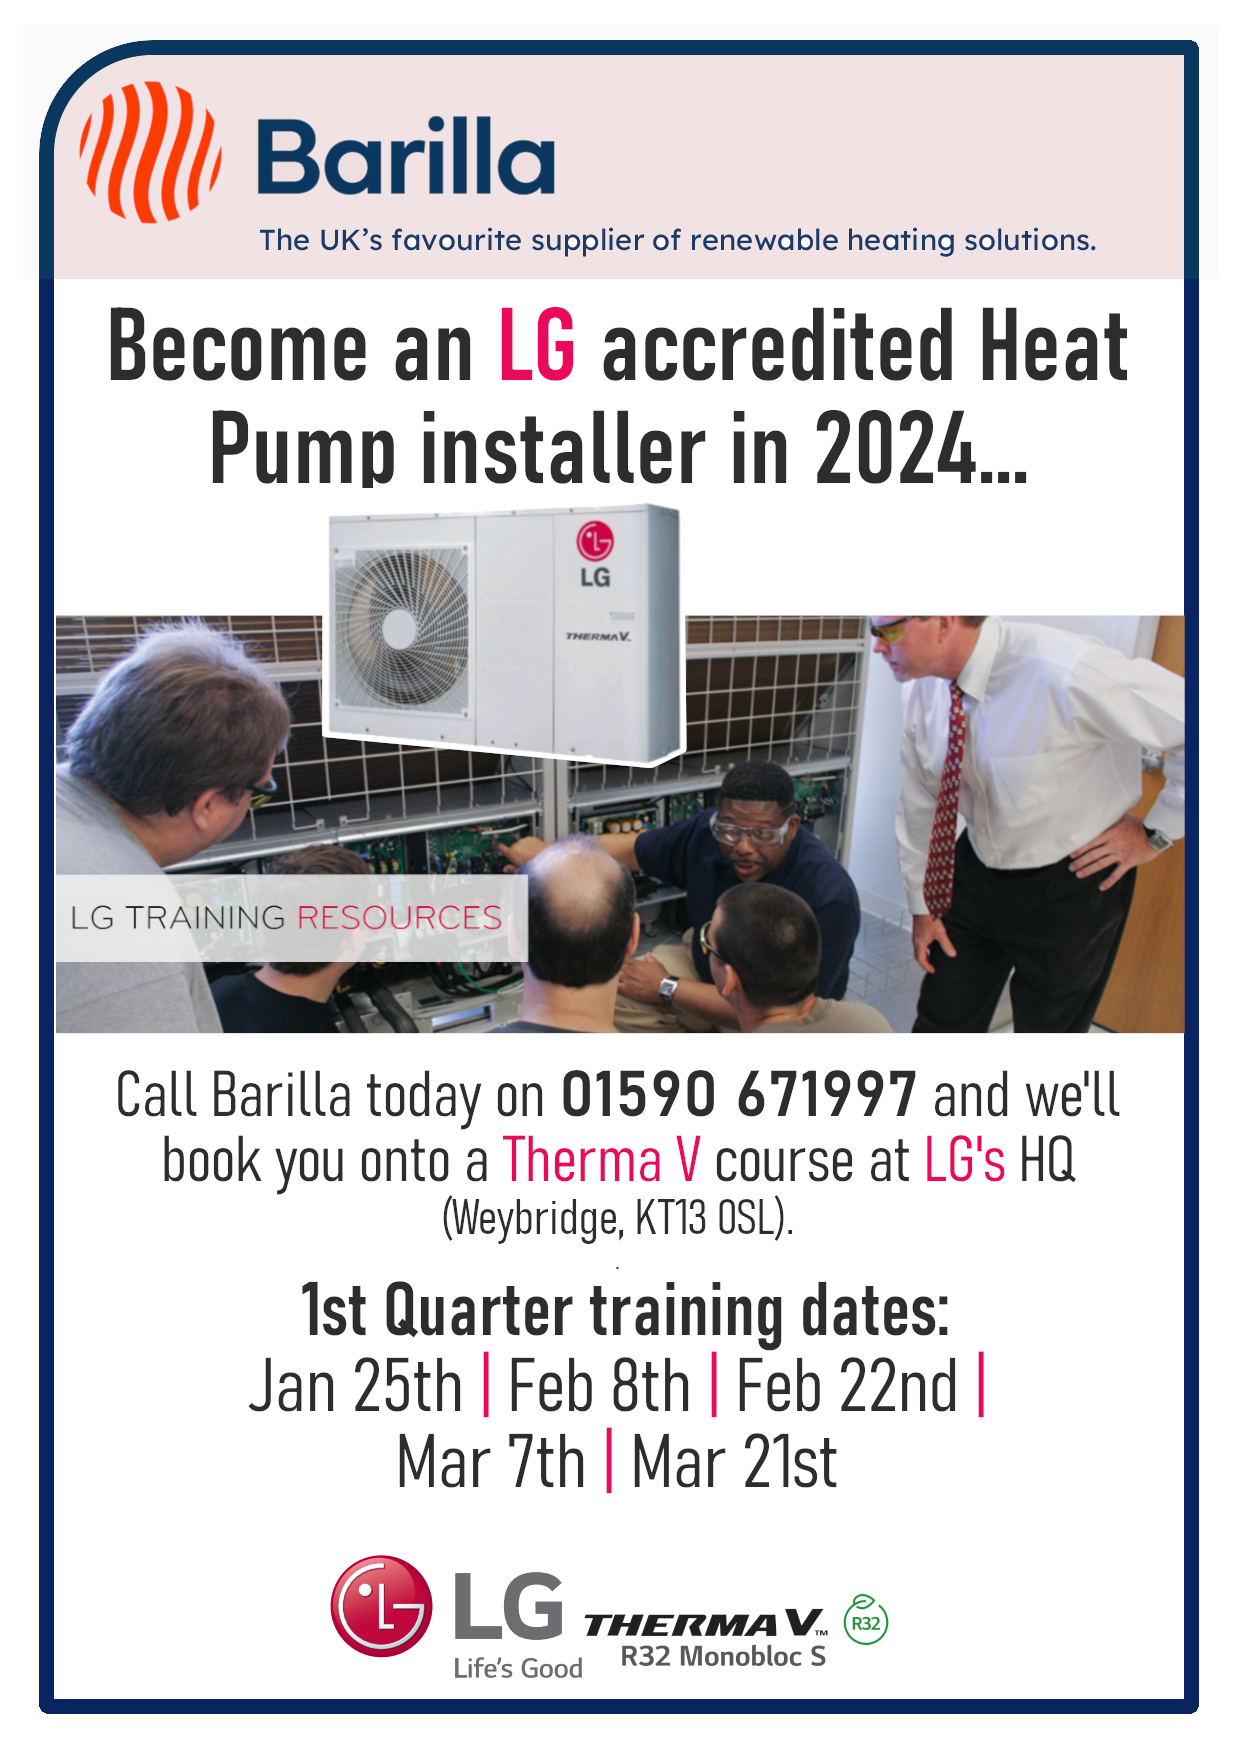 Become an LG accredited installer in 2024...